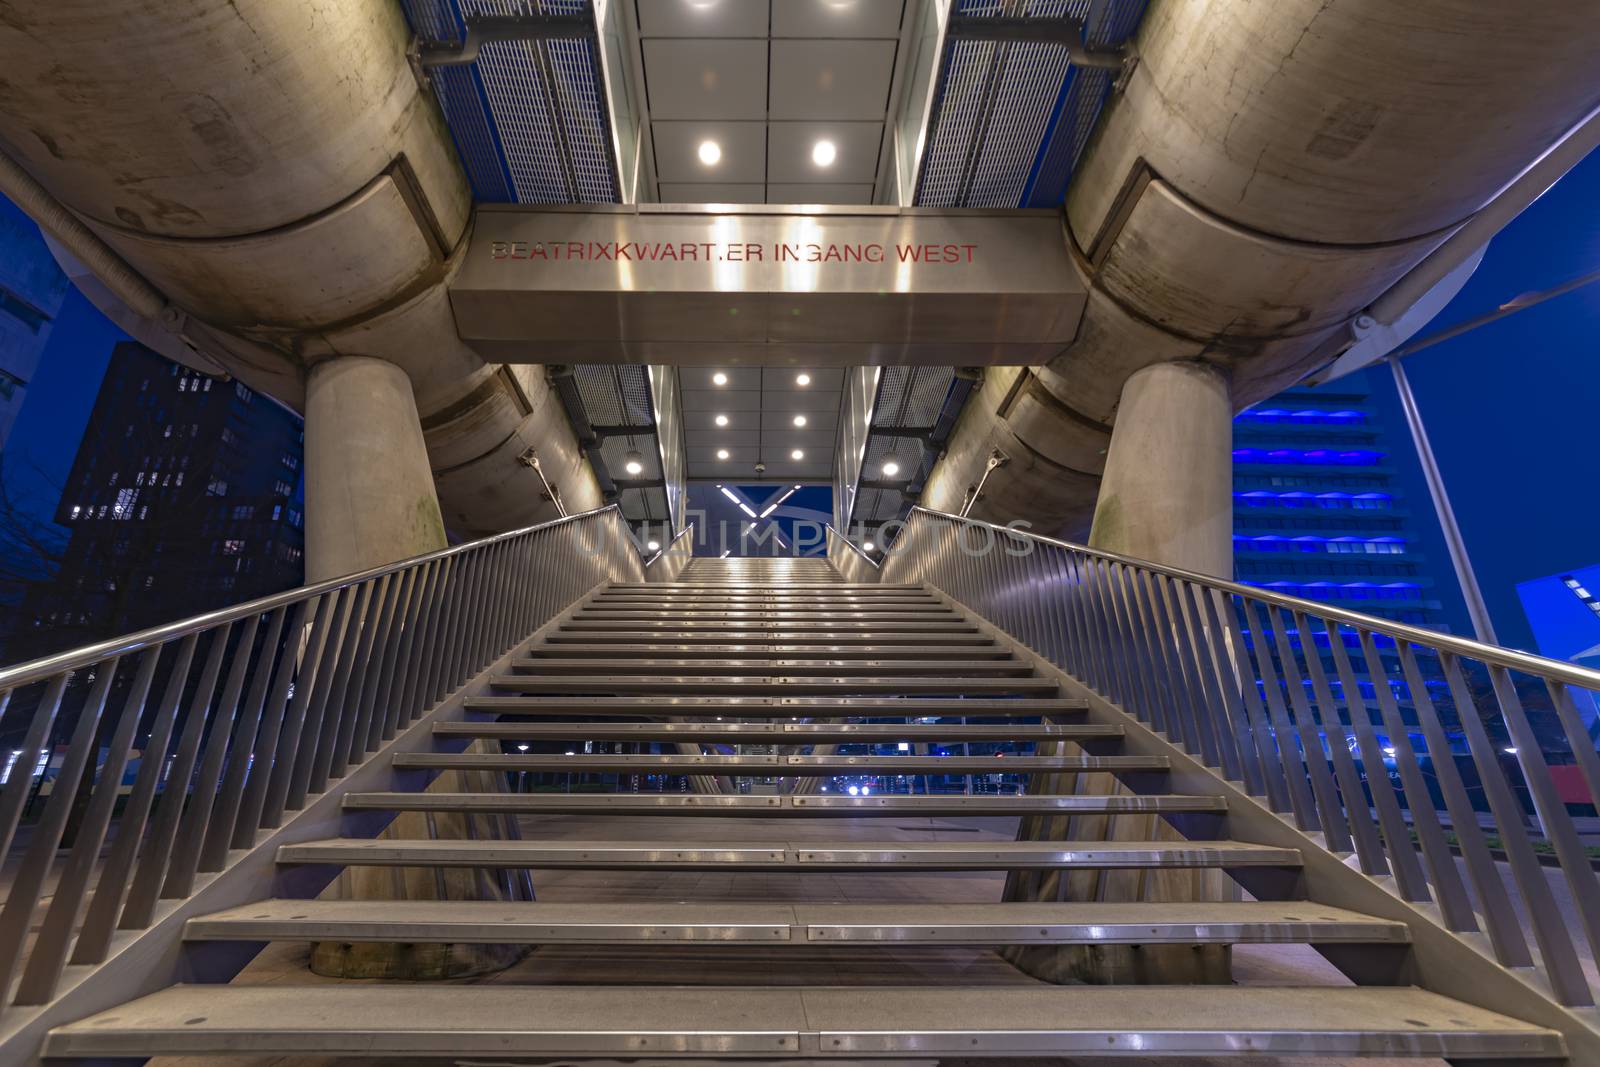 Beatrixkwartier (Beatrix district in Dutch) entrance east Escalator to a tramway station in The Hague at night